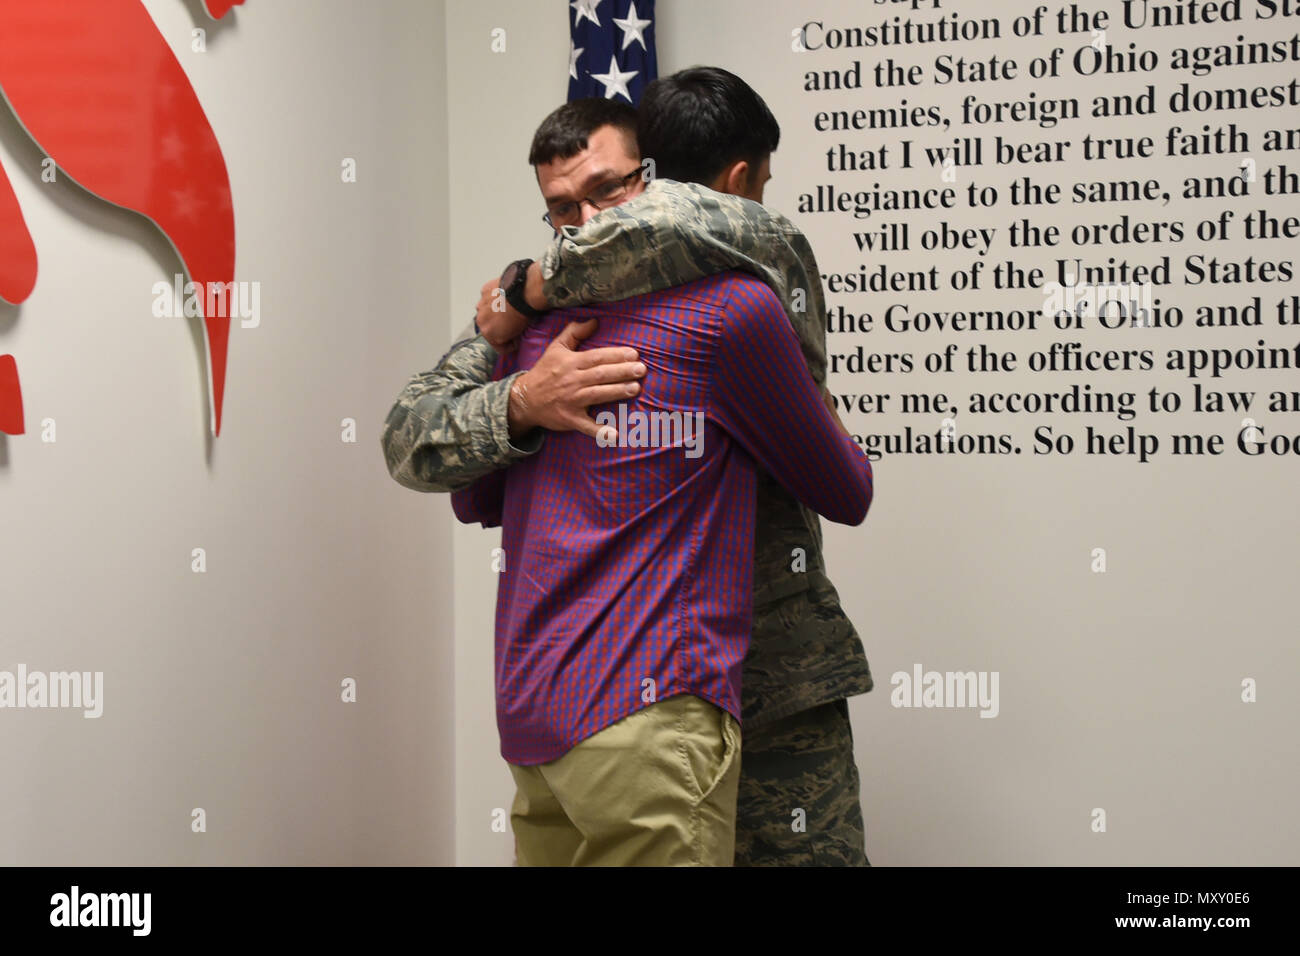 Senior Master Sgt. Roger Burton, the fire chief at the 179th AW, embraces  his son Cooper Burton on Dec. 2, 2016, at the 179th Airlift Wing,  Mansfield, Ohio. They both recited the